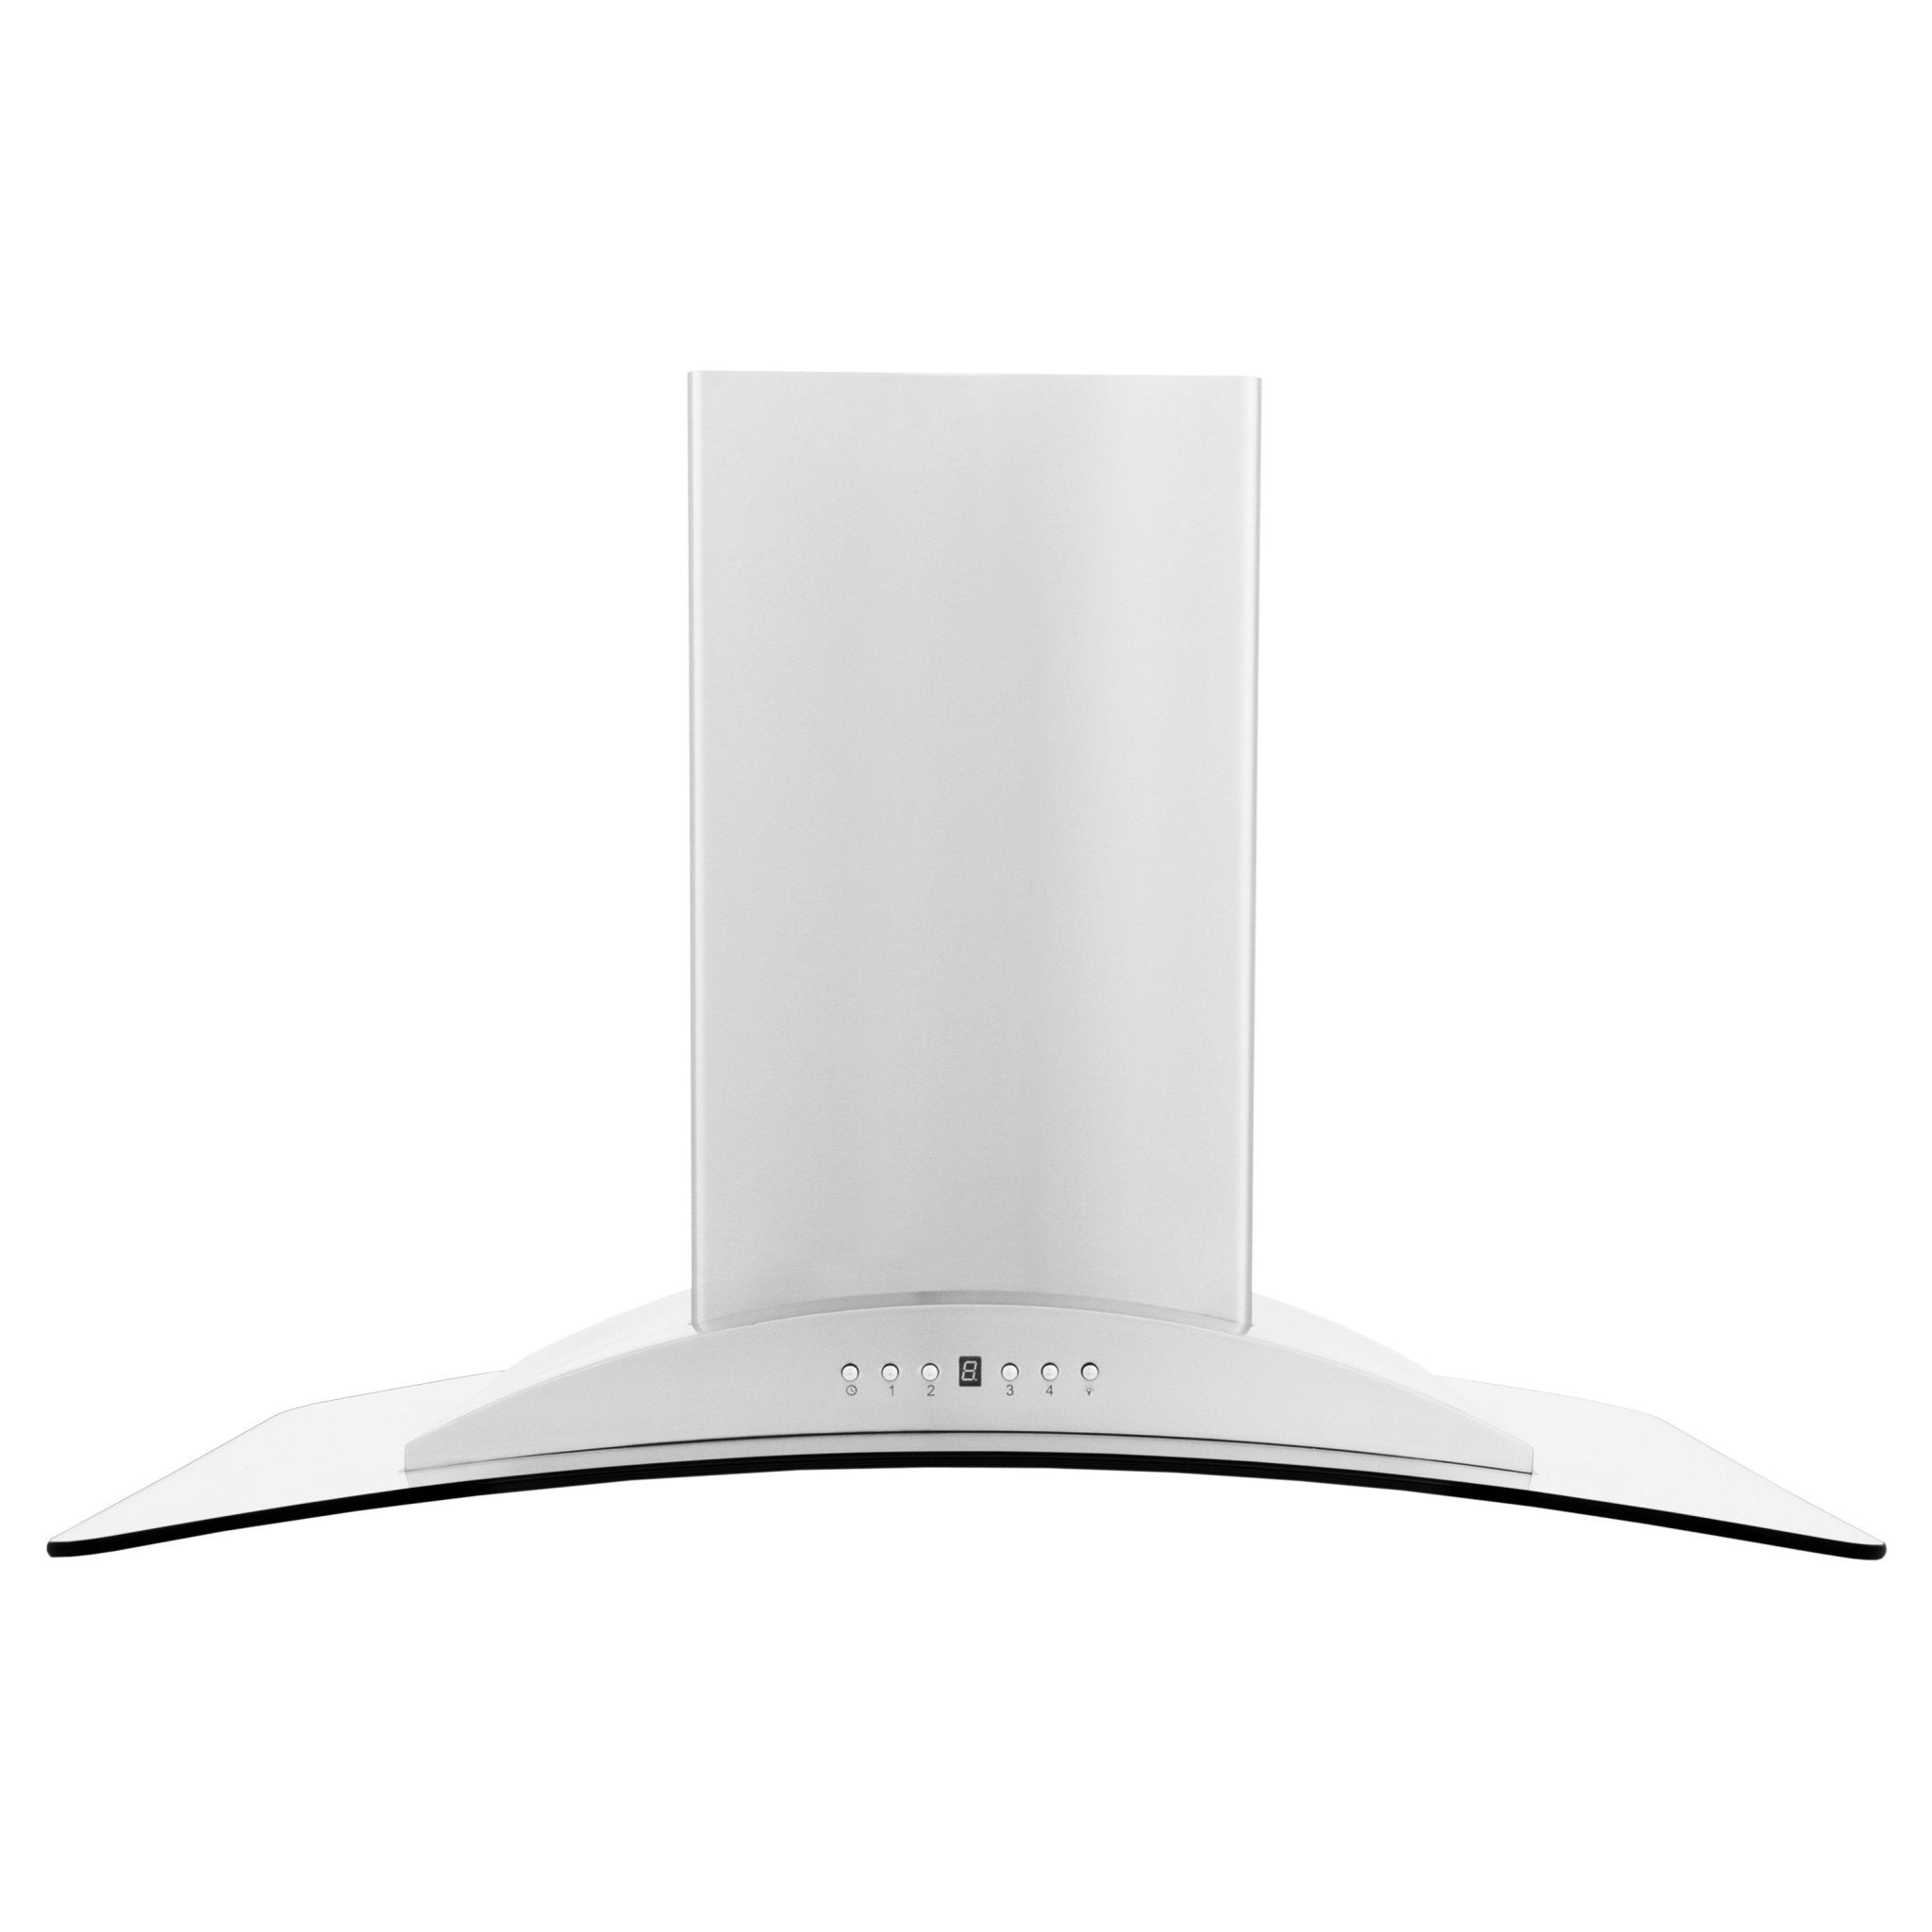 ZLINE Convertible Vent Island Mount Range Hood in Stainless Steel and Glass (GL9i) front.